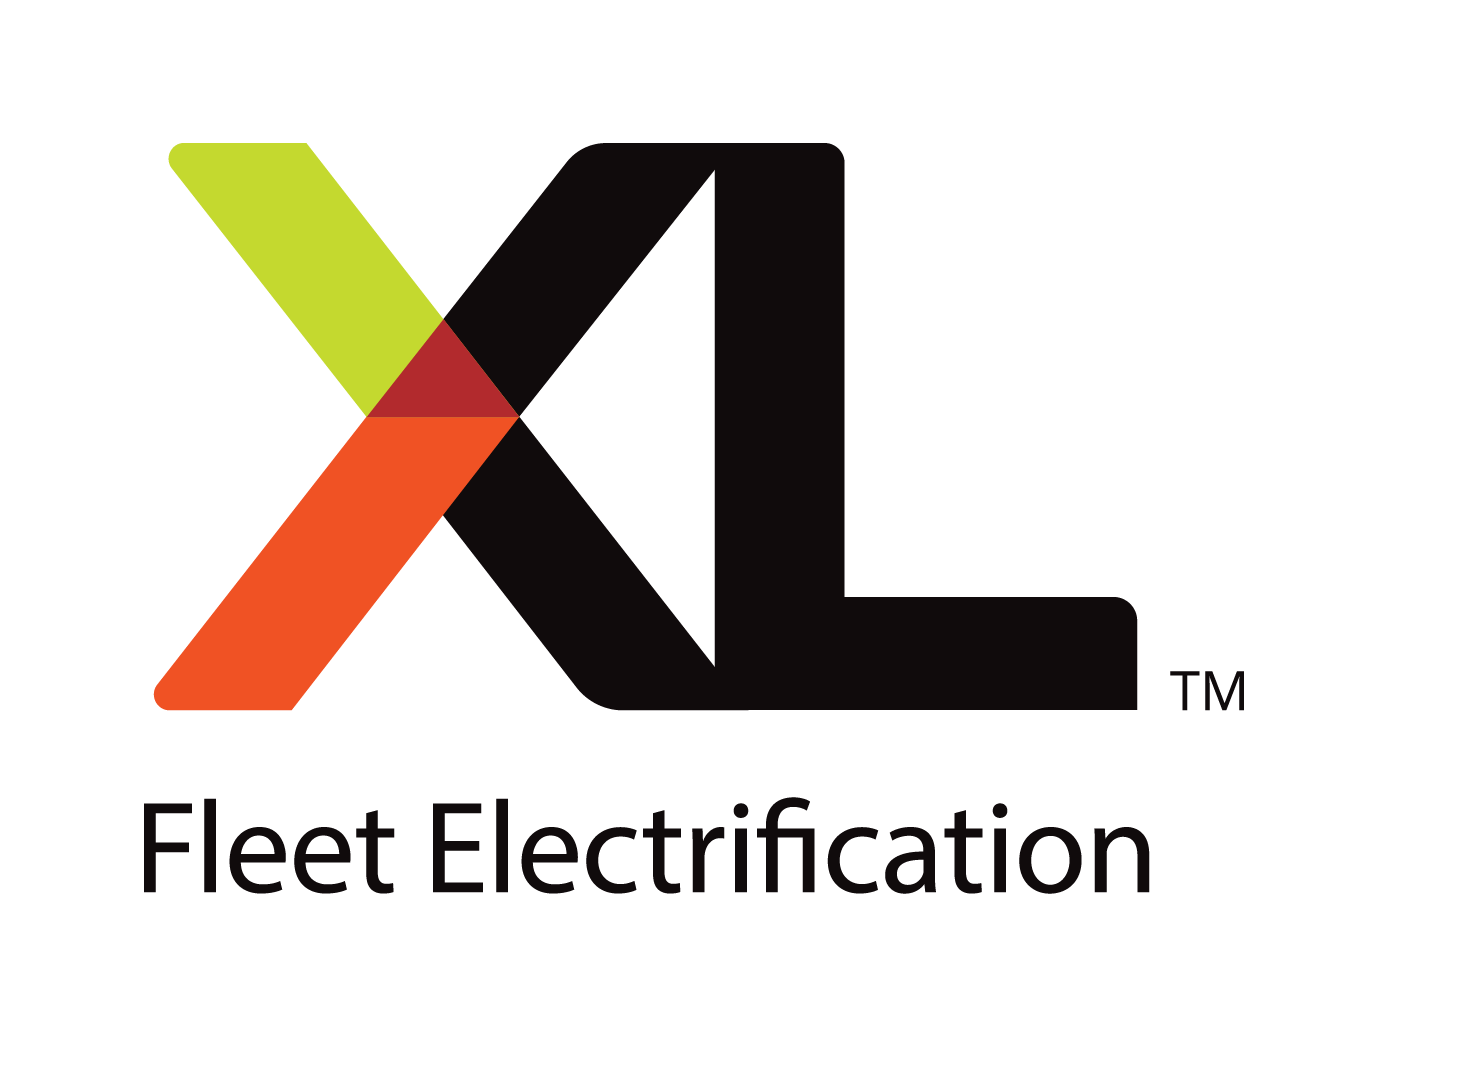 XL has been offering hybrid electric drive systems for a wide range of commercial Ford, GM and Isuzu vehicles for the past decade.